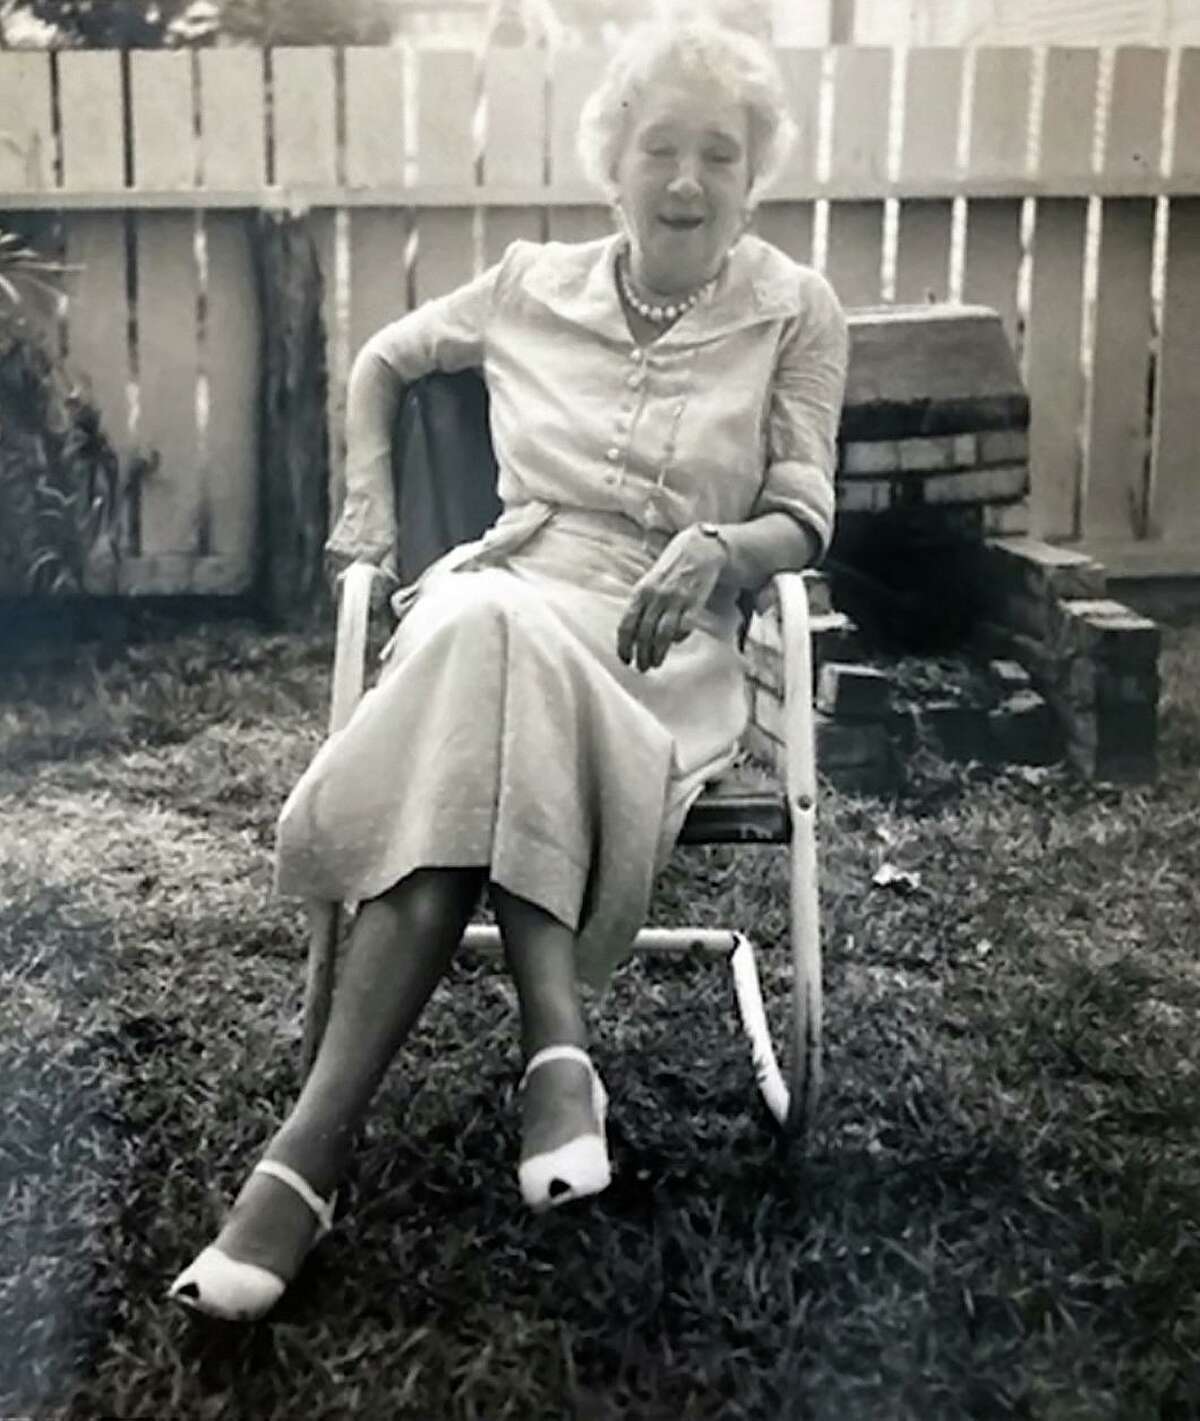 Still active in her 60s, Penelope "Nellie" Borden relaxes in the backyard of her home at 117 Jackson St. in the downtown San Antonio area, near the high school now known as Fox Tech. Borden was a music teacher at that school, previously known as Main Avenue High School, and was also the music editor and columnist for the San Antonio Express. And she wrote for the San Antonio Light.